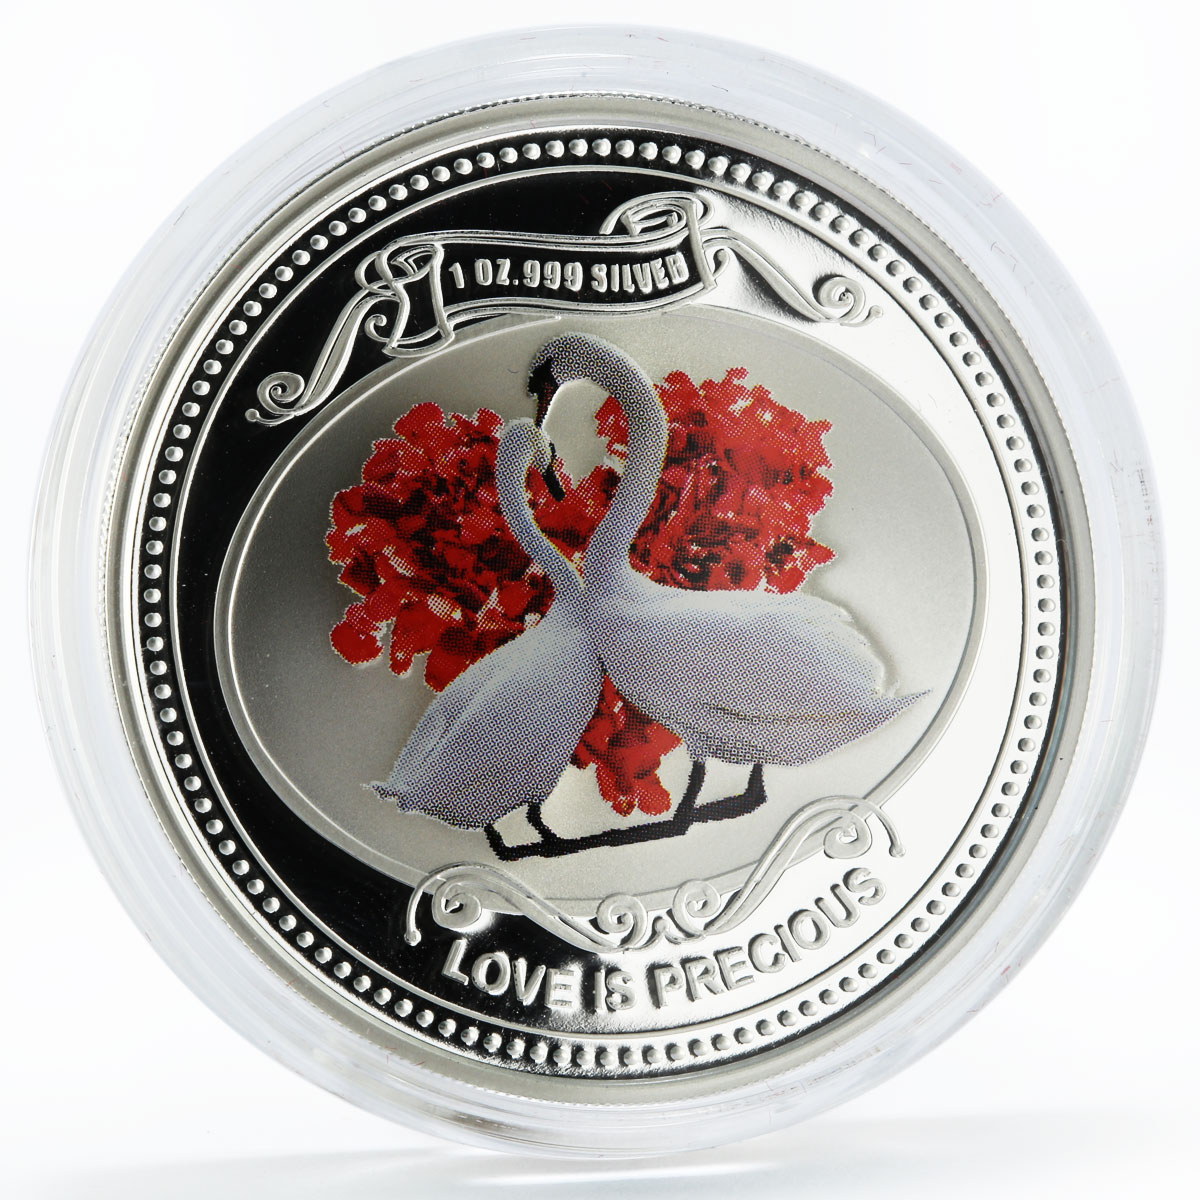 Niue 2 dollars Love is Precious series Two Swans colored silver coin 2010